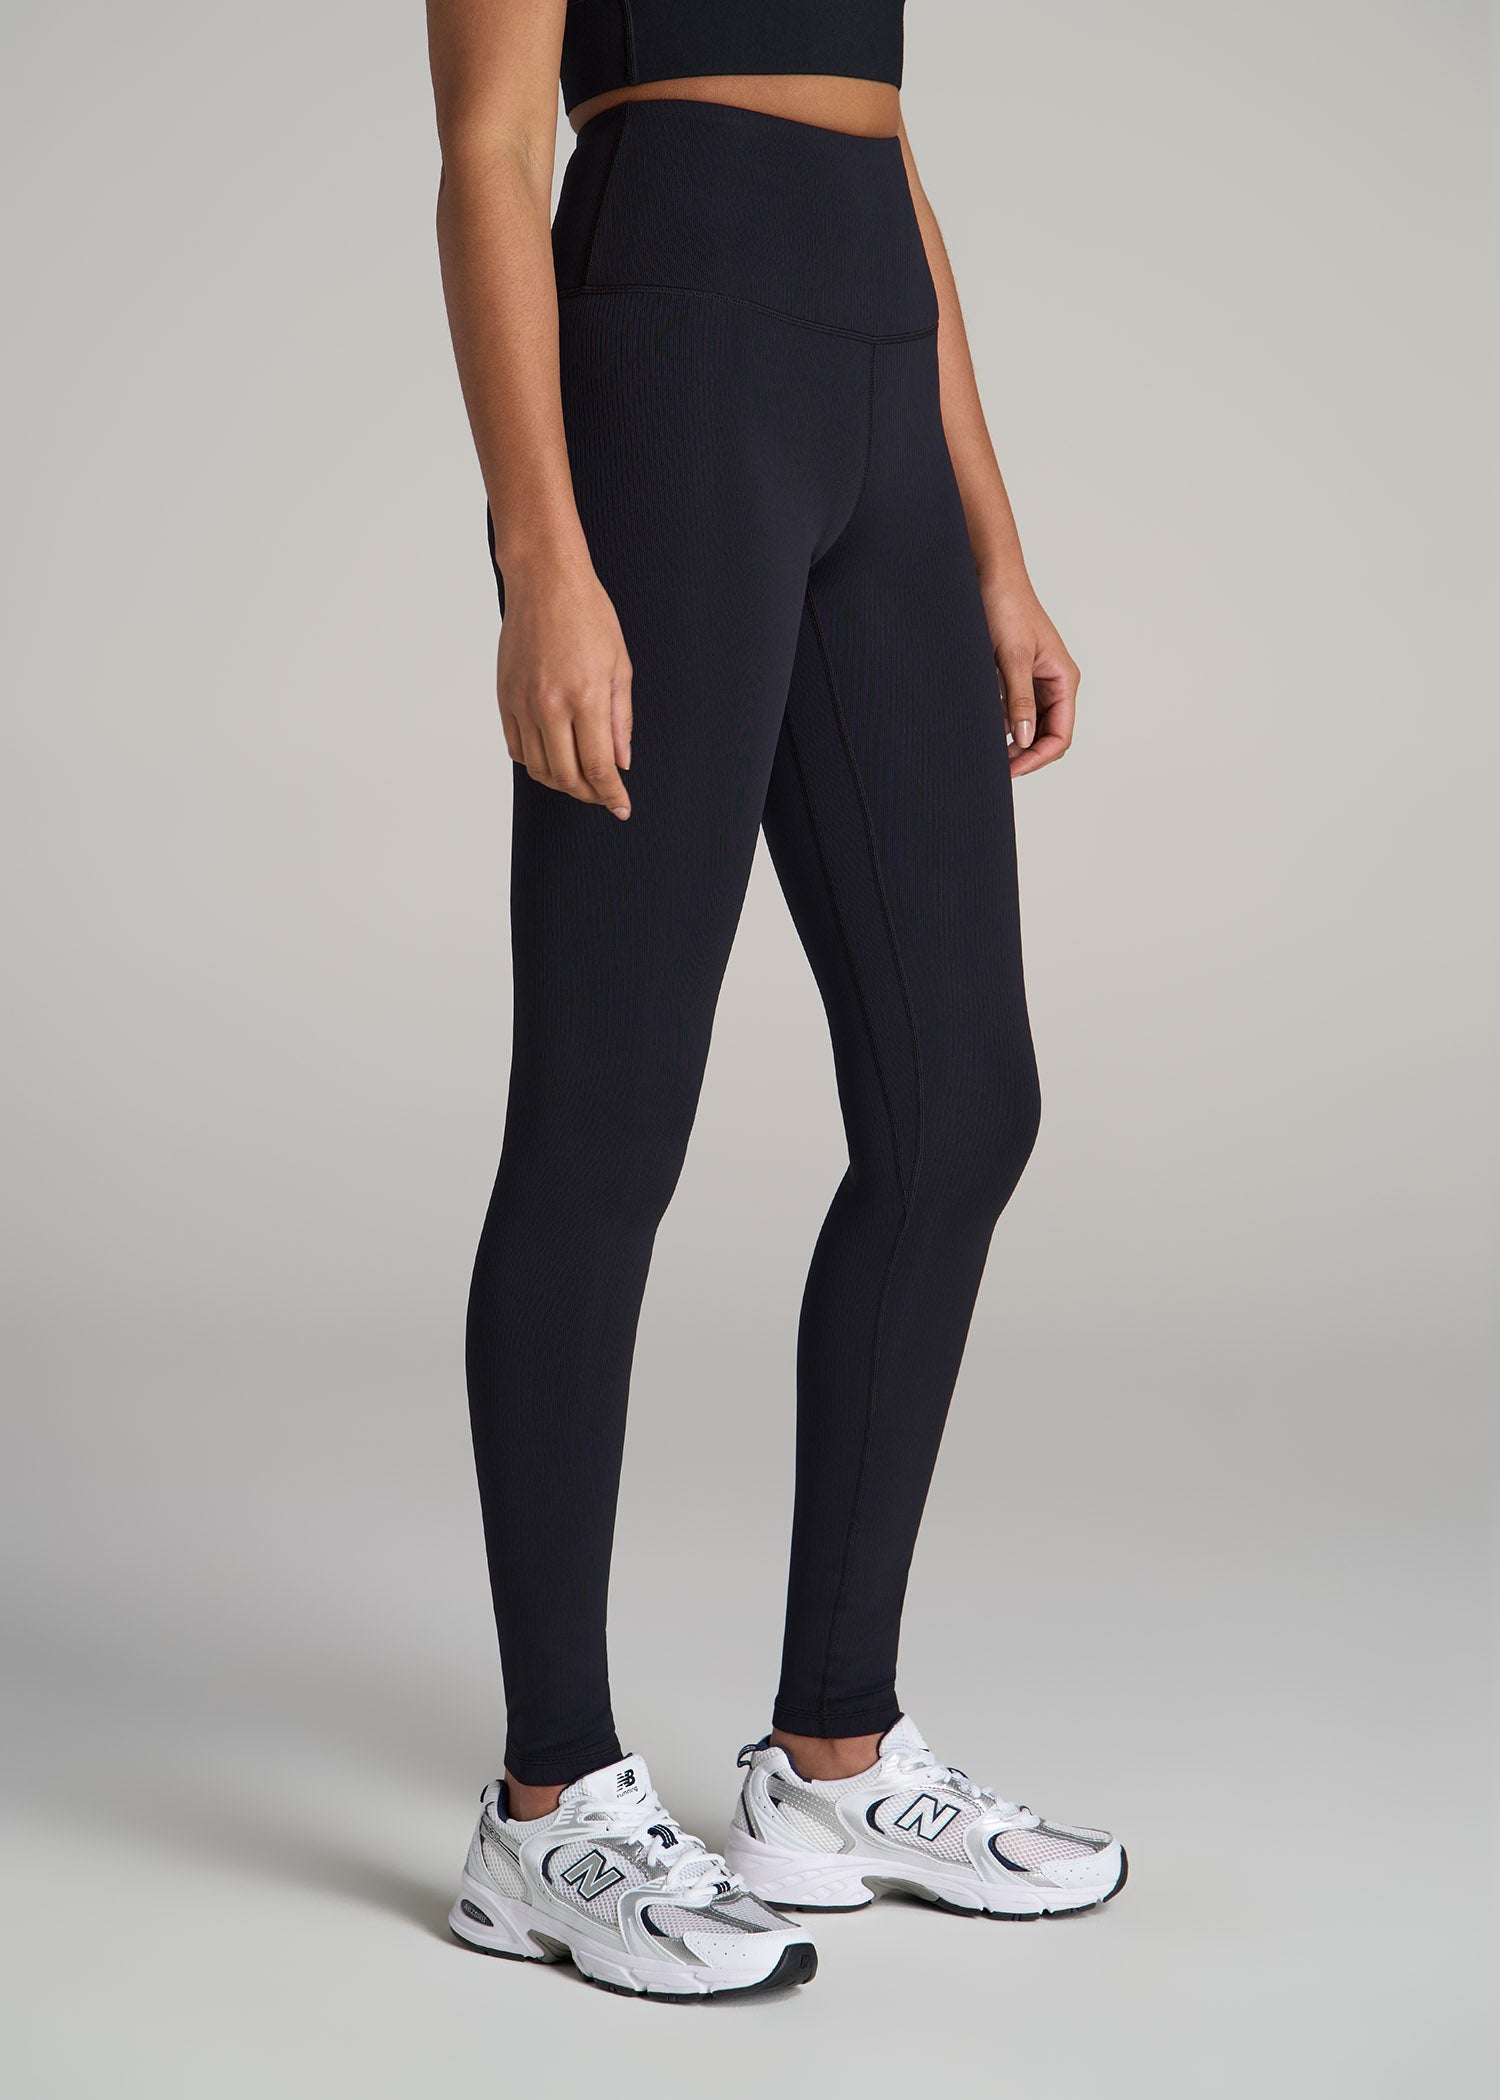 AT Balance High-Rise Leggings for Tall Women in Ribbed Black – American Tall